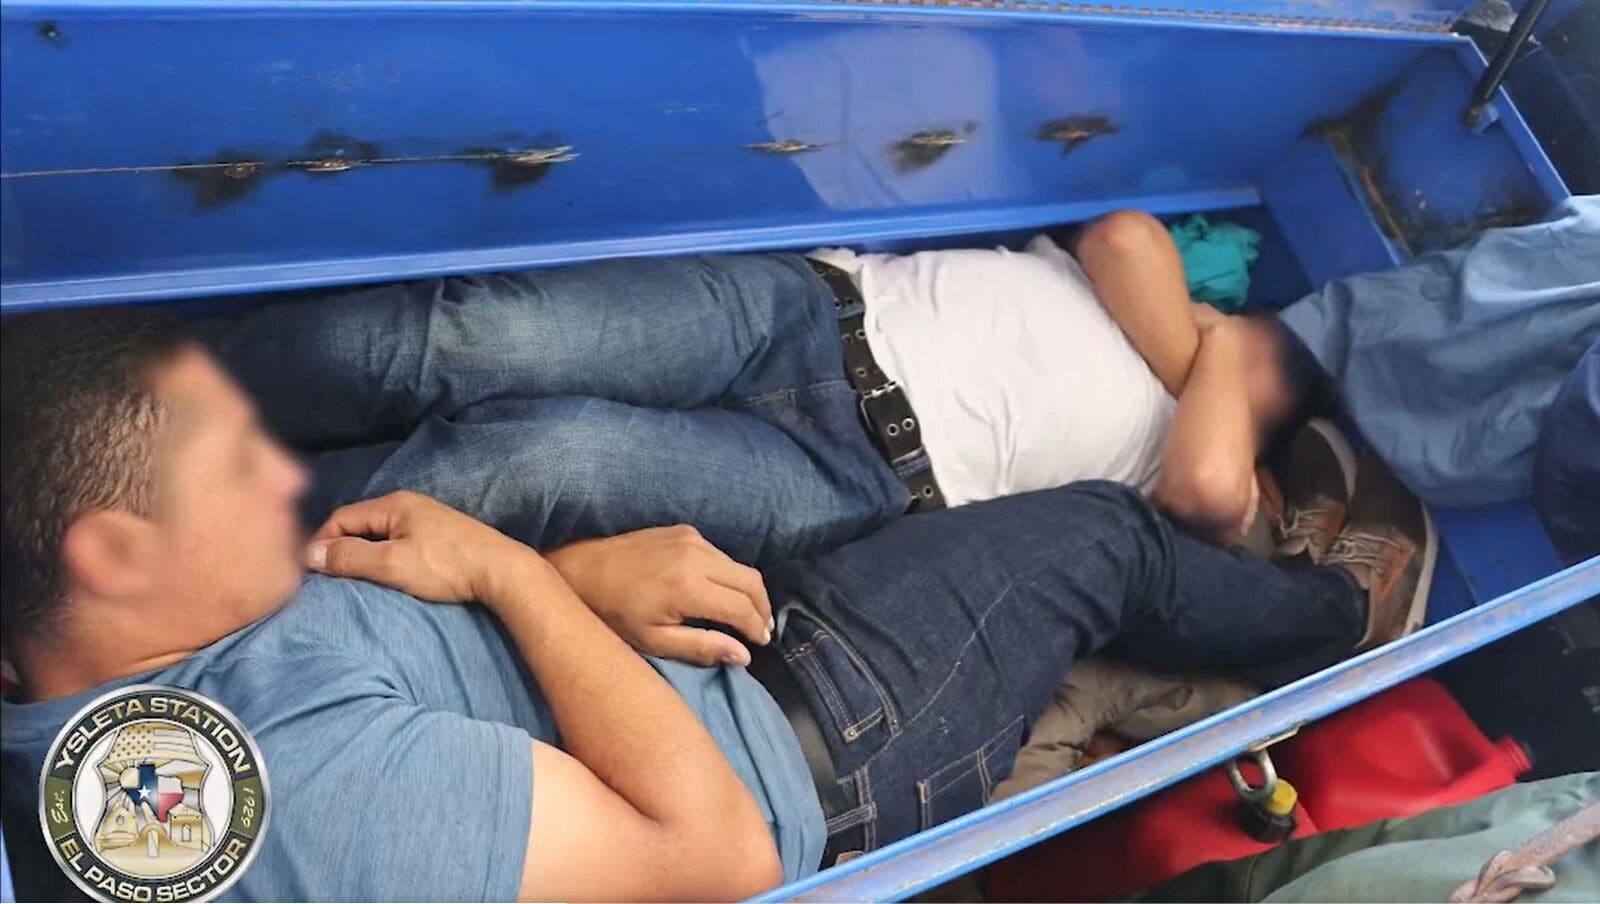 Border Patrol agents in Texas discover migrants smuggled inside toolboxes at checkpoint